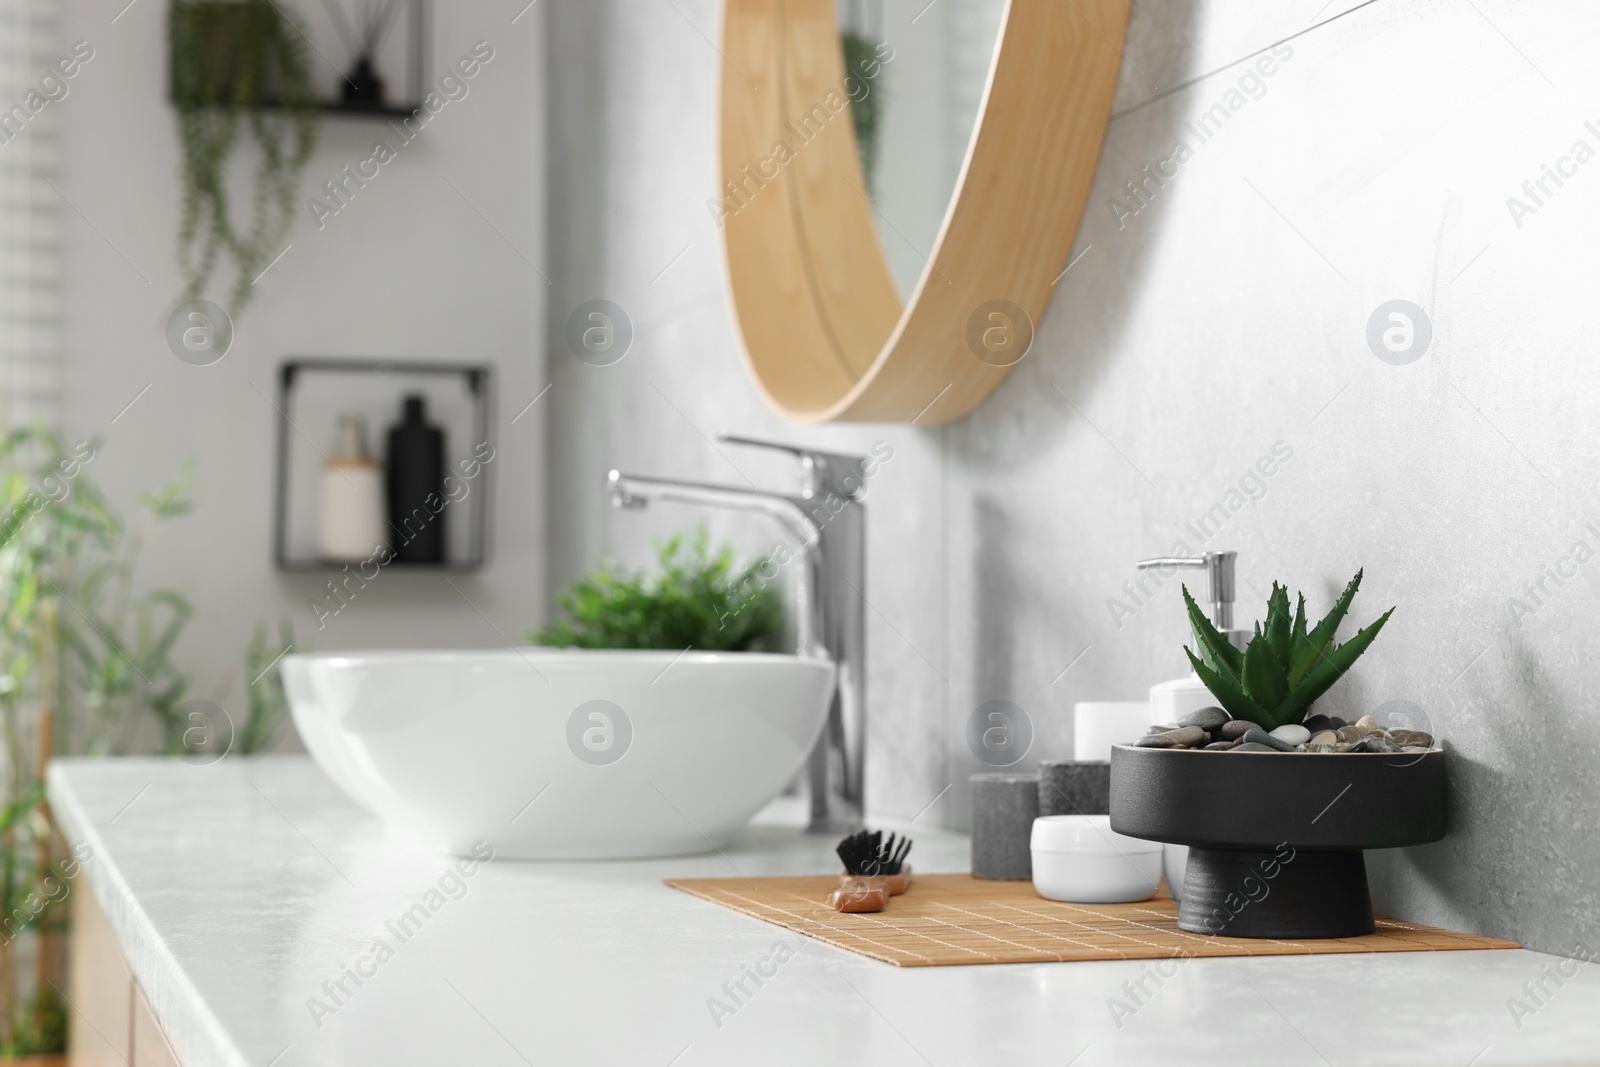 Photo of Potted artificial plants and toiletries near sink on bathroom vanity